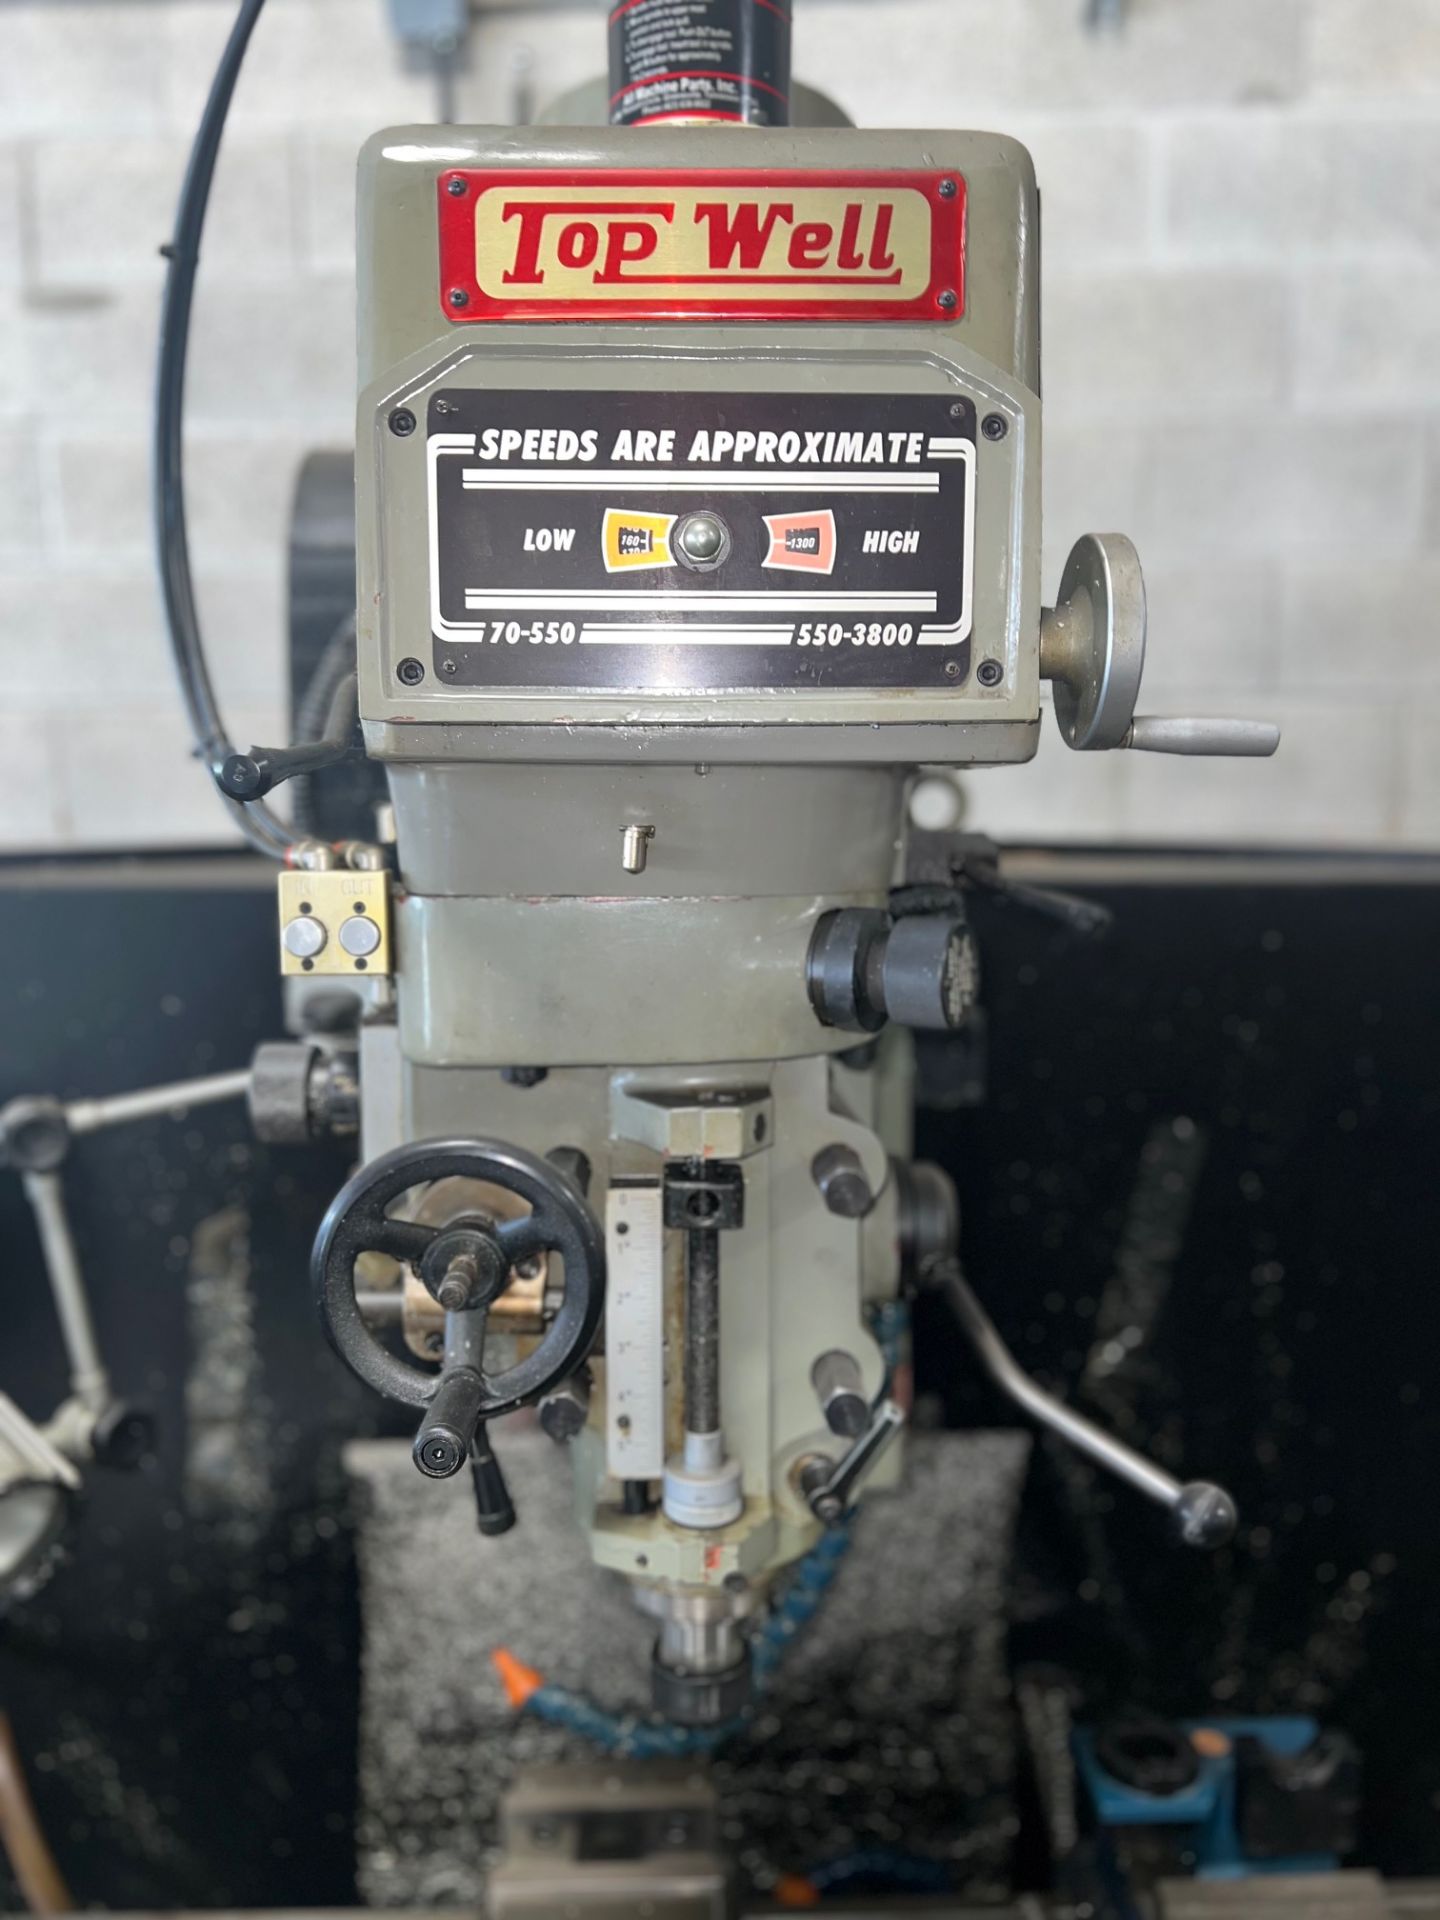 TOP WELL, MILLING MACHINE, MANUAL AND AUTOMATIC WITH ANILAM 3300 MK DISPLAY - Image 2 of 5